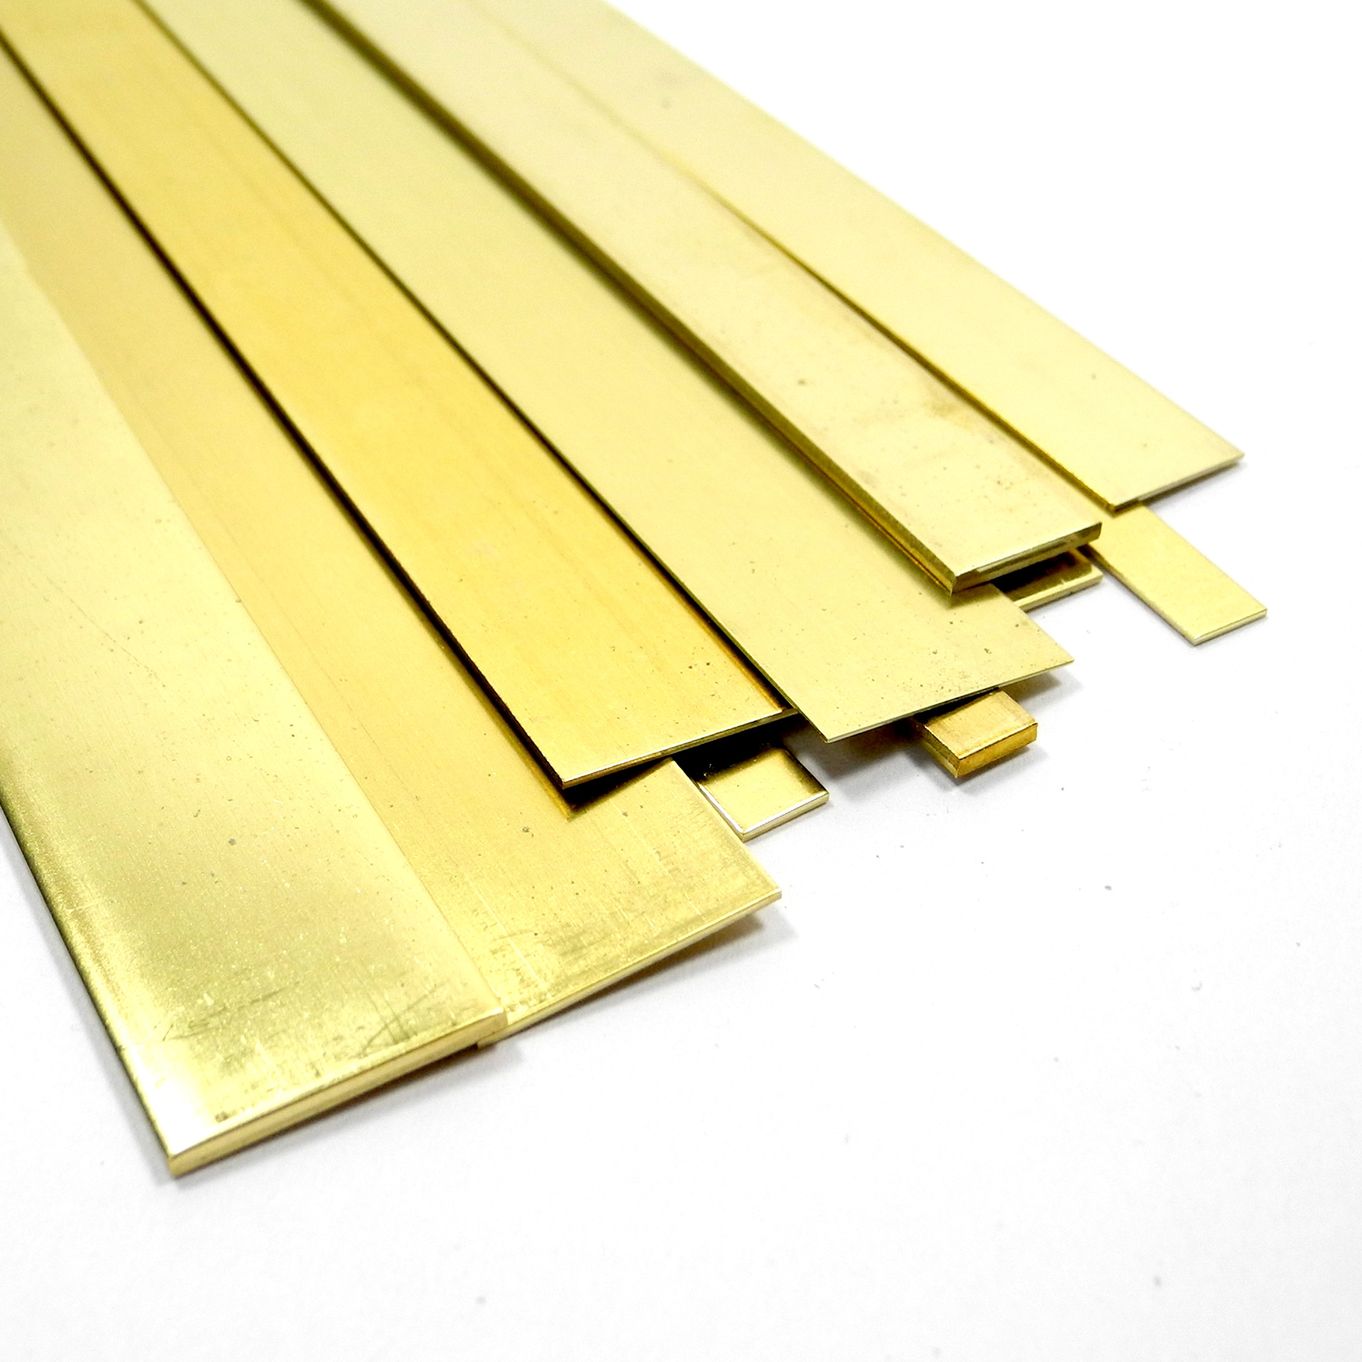 K & S 9715 Brass Strip, 0.016 Thick x 1 Wide x 36 Long, 5 Pieces, Made  in The USA